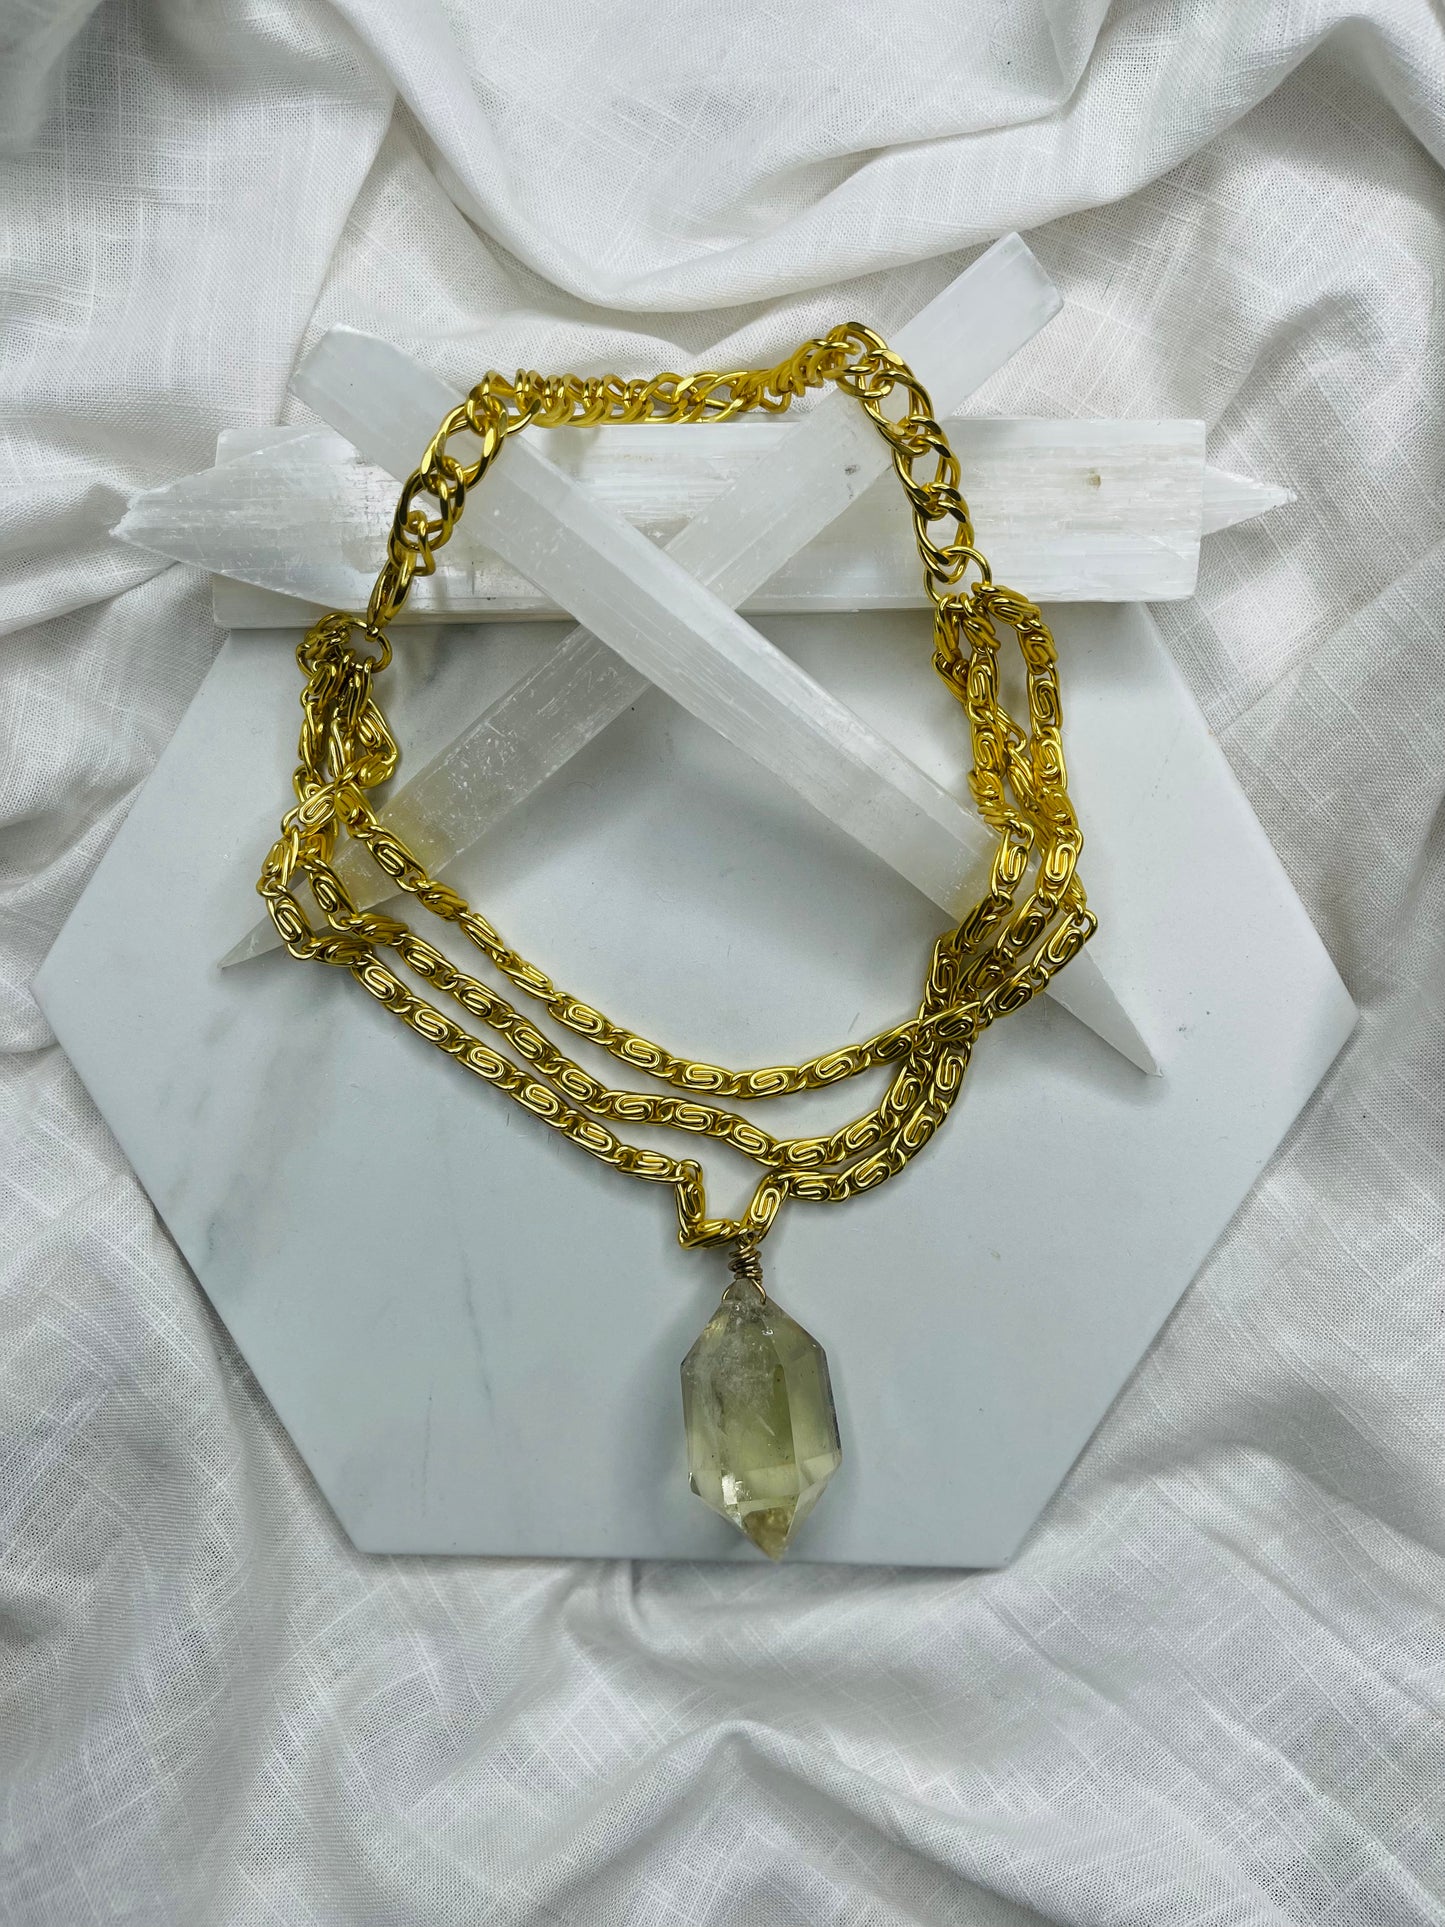 Multi Chain Rare High Quality Faceted Citrine Soul Chain Necklace Hand wrapped on vintage chain